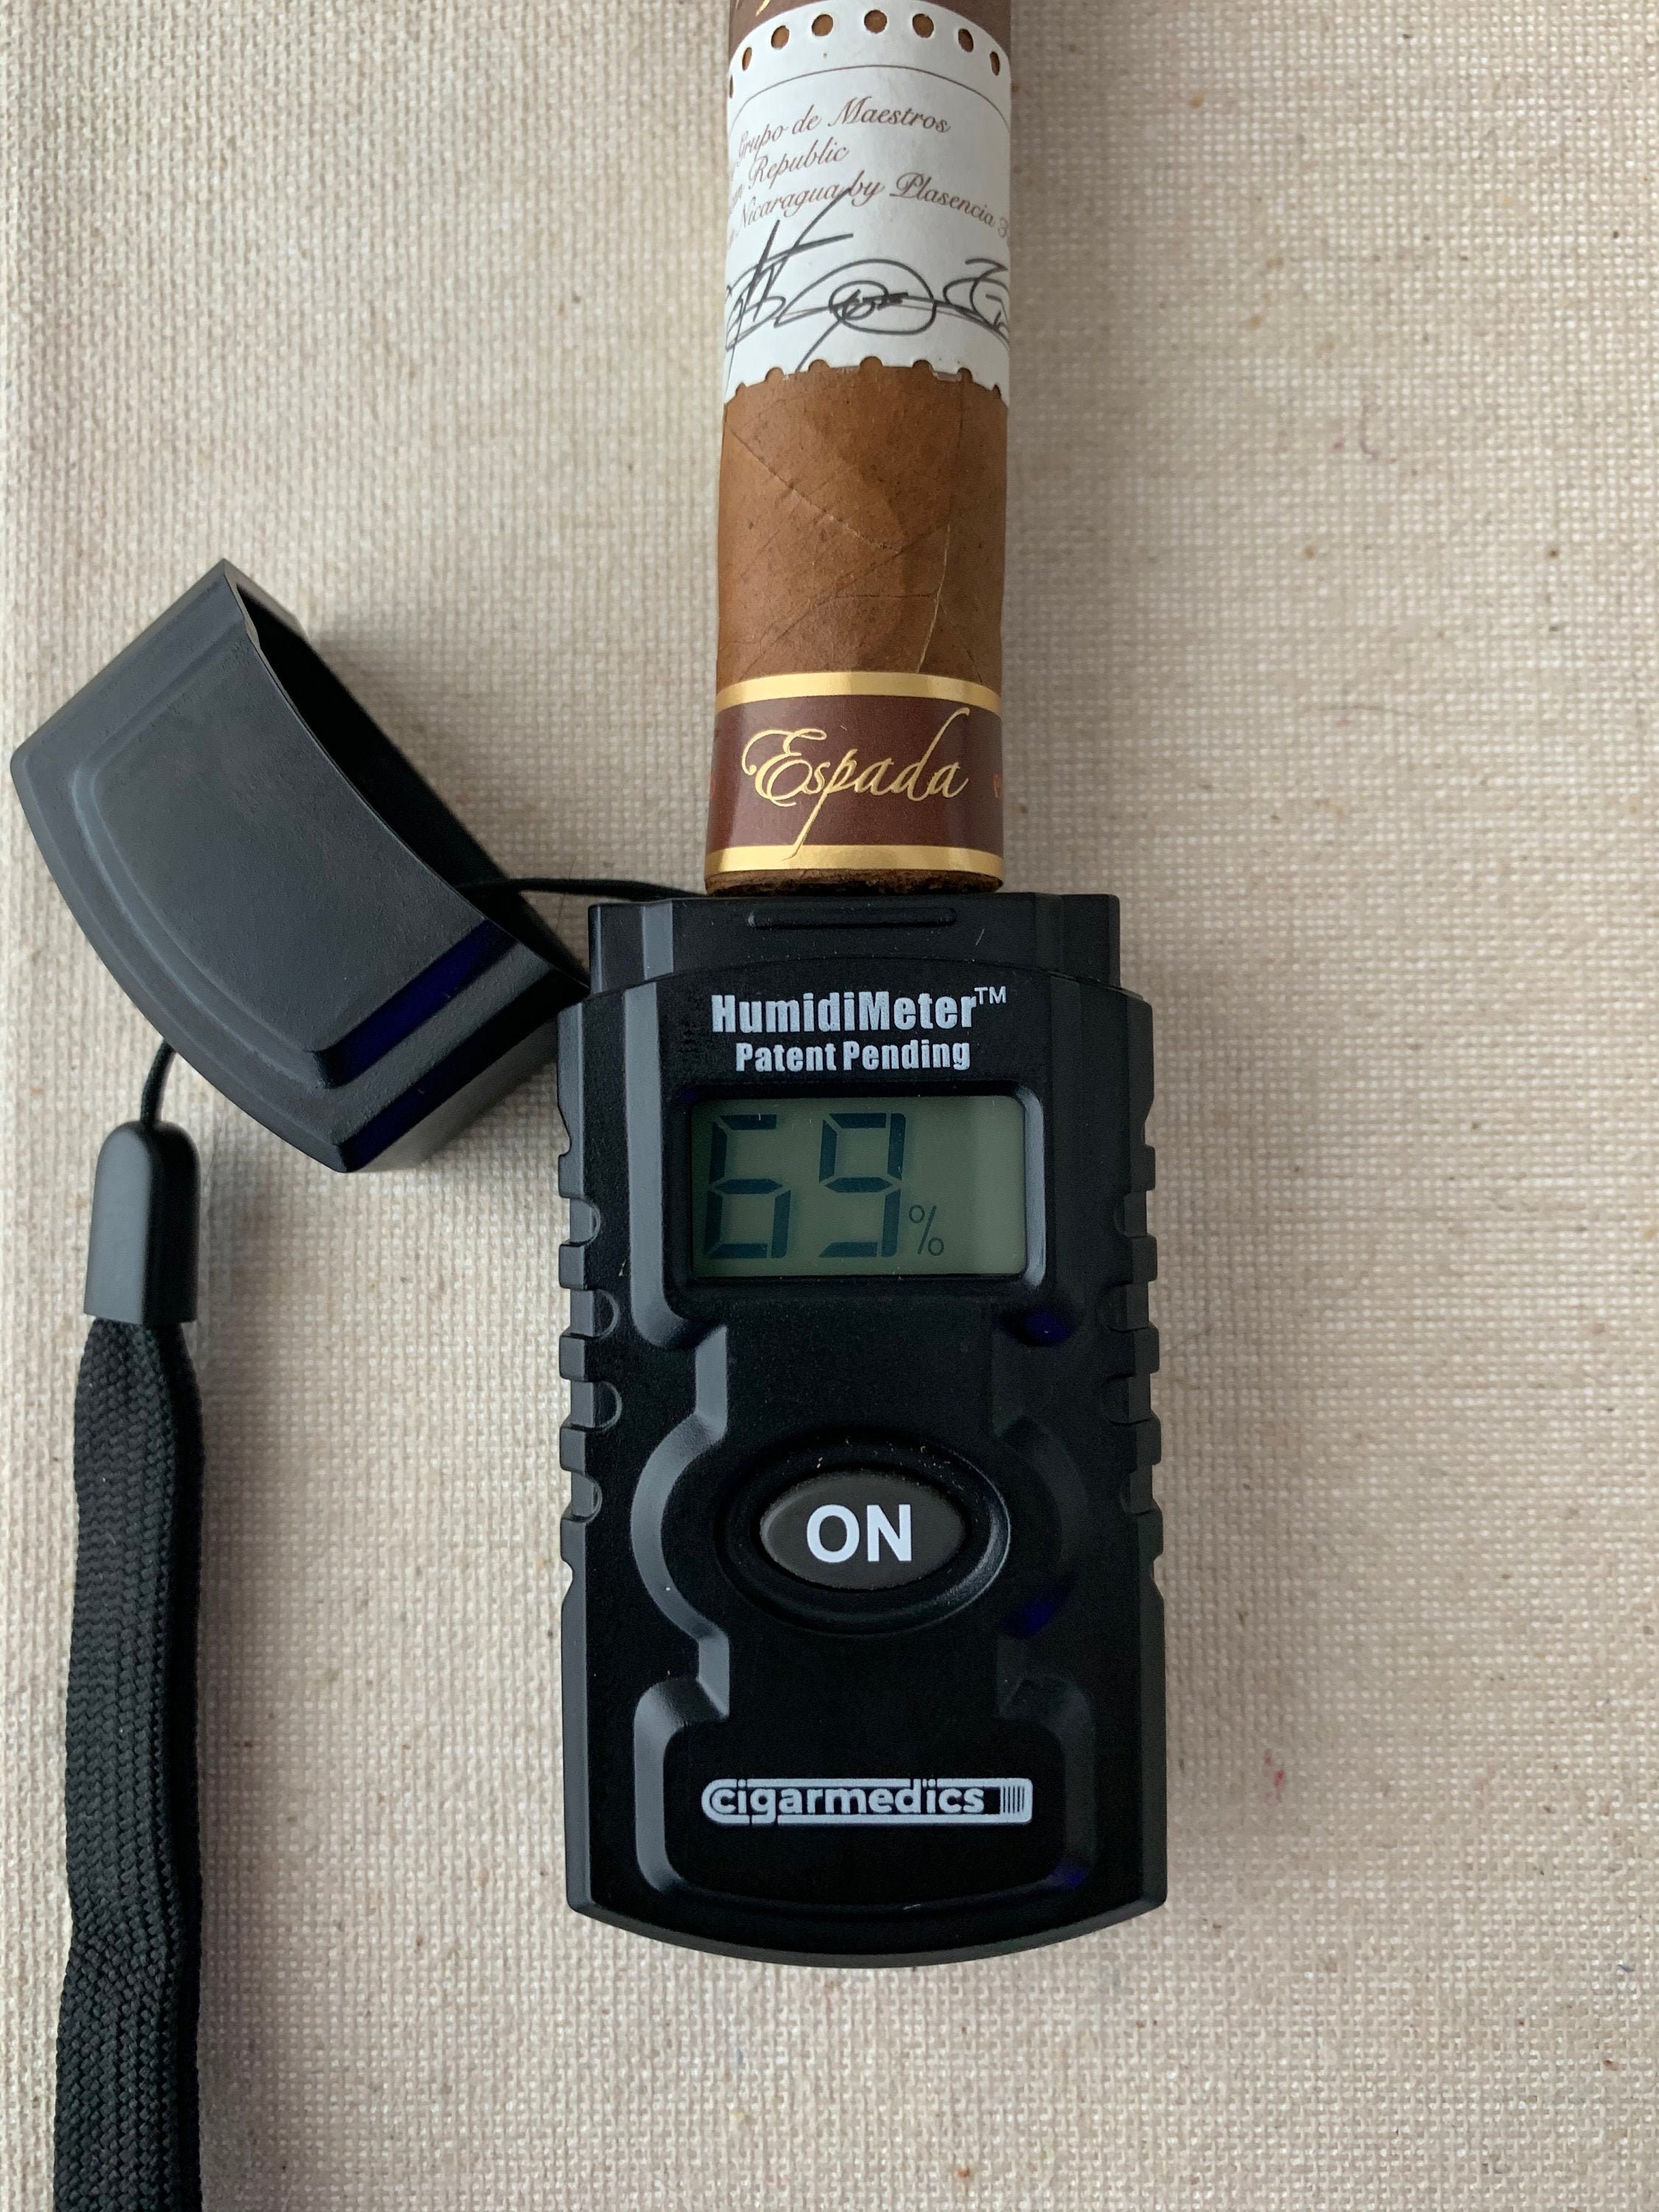 cigar humidity tester/meter/gauge accessory bundled with